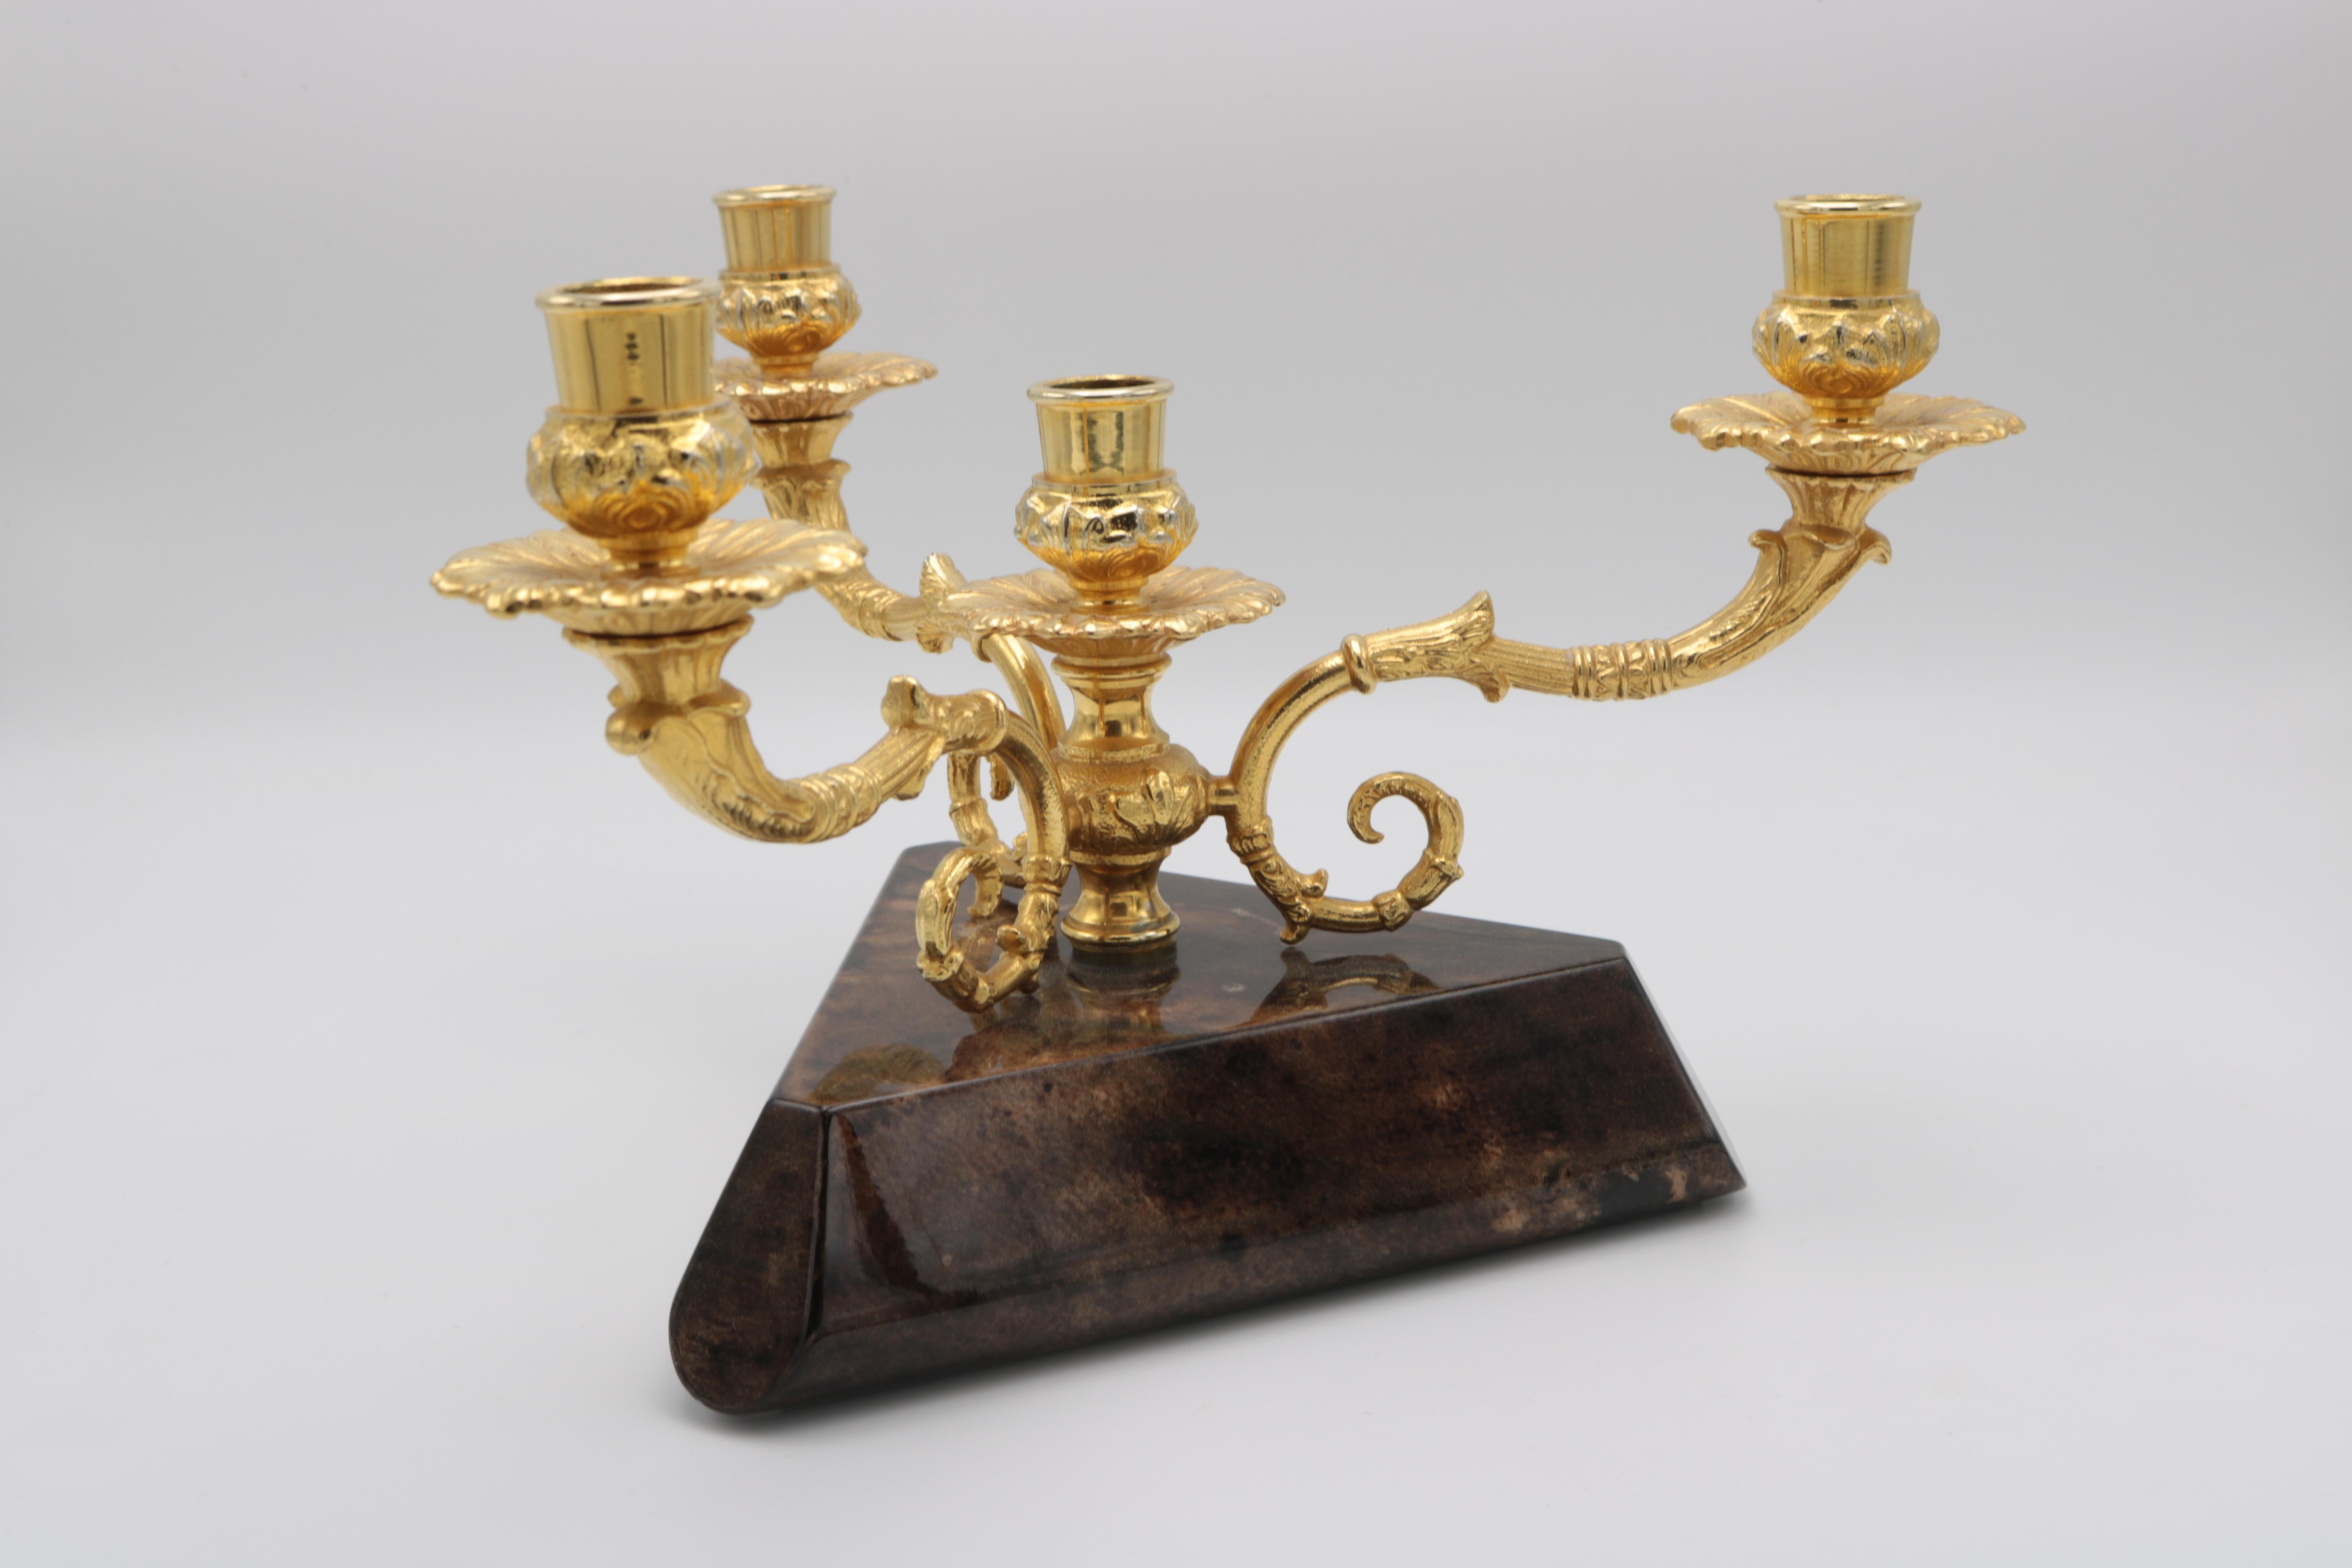 An Aldo Tura Modernist three-arm candelabrum.
Patinated brass arms with wooden base covered in lacquered parchment.